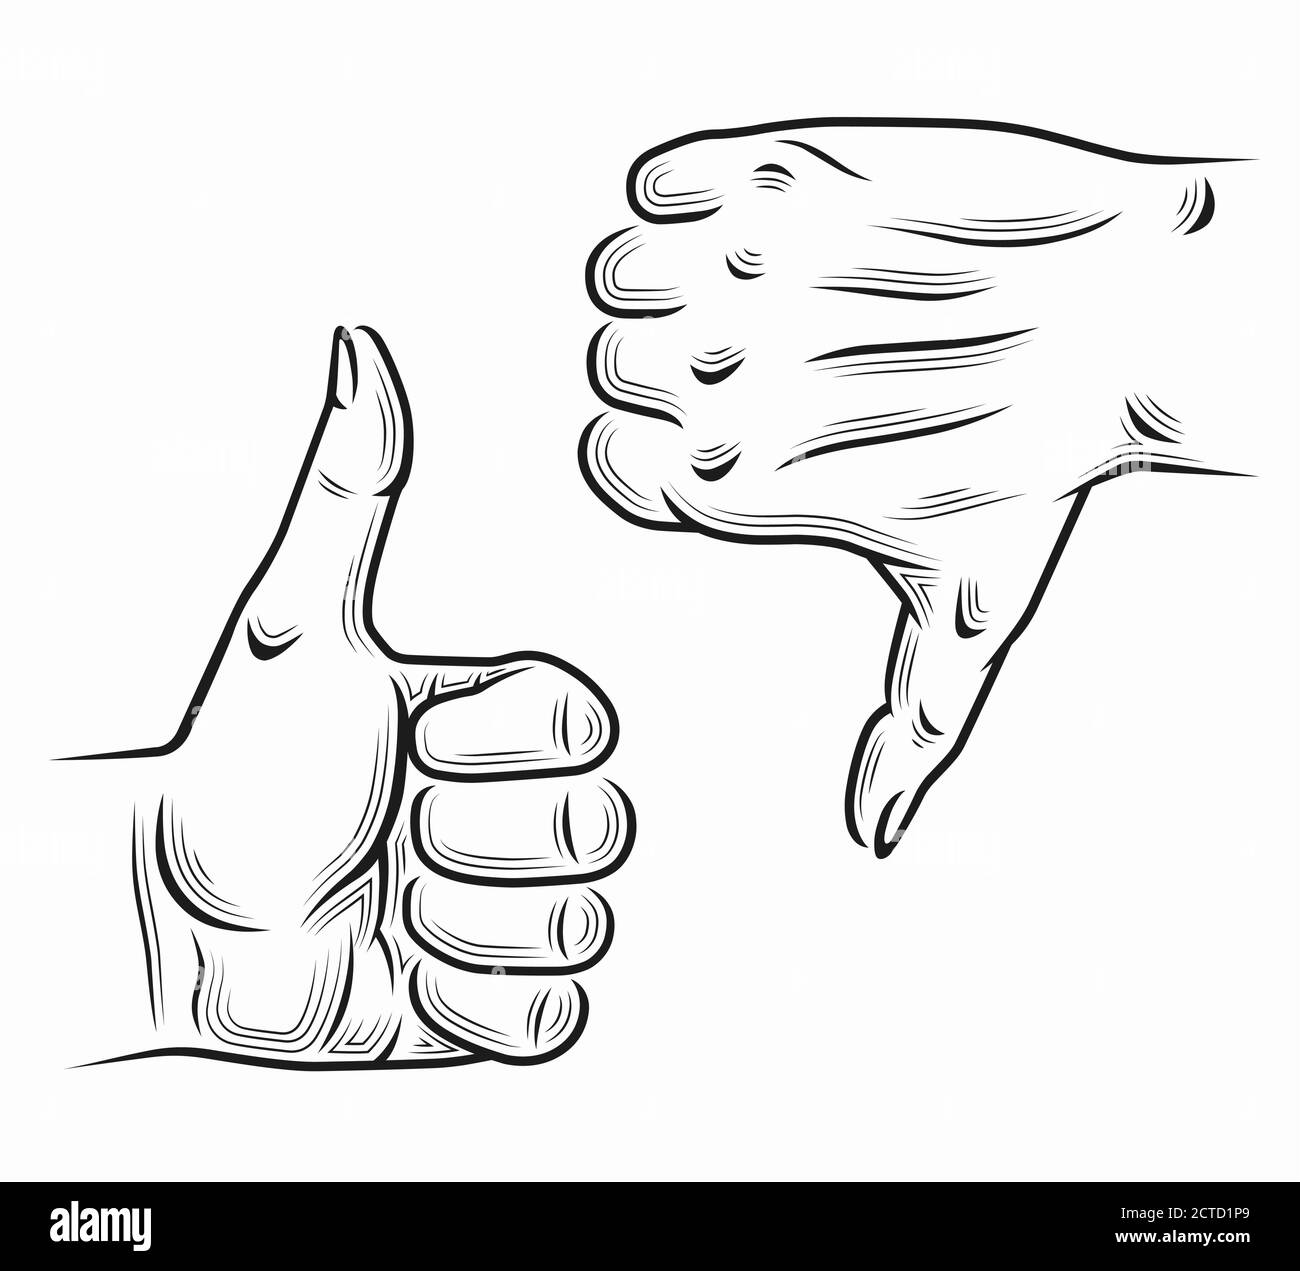 Thumb up and thumb down hand gesture vector illustration in engraving linear style Stock Vector